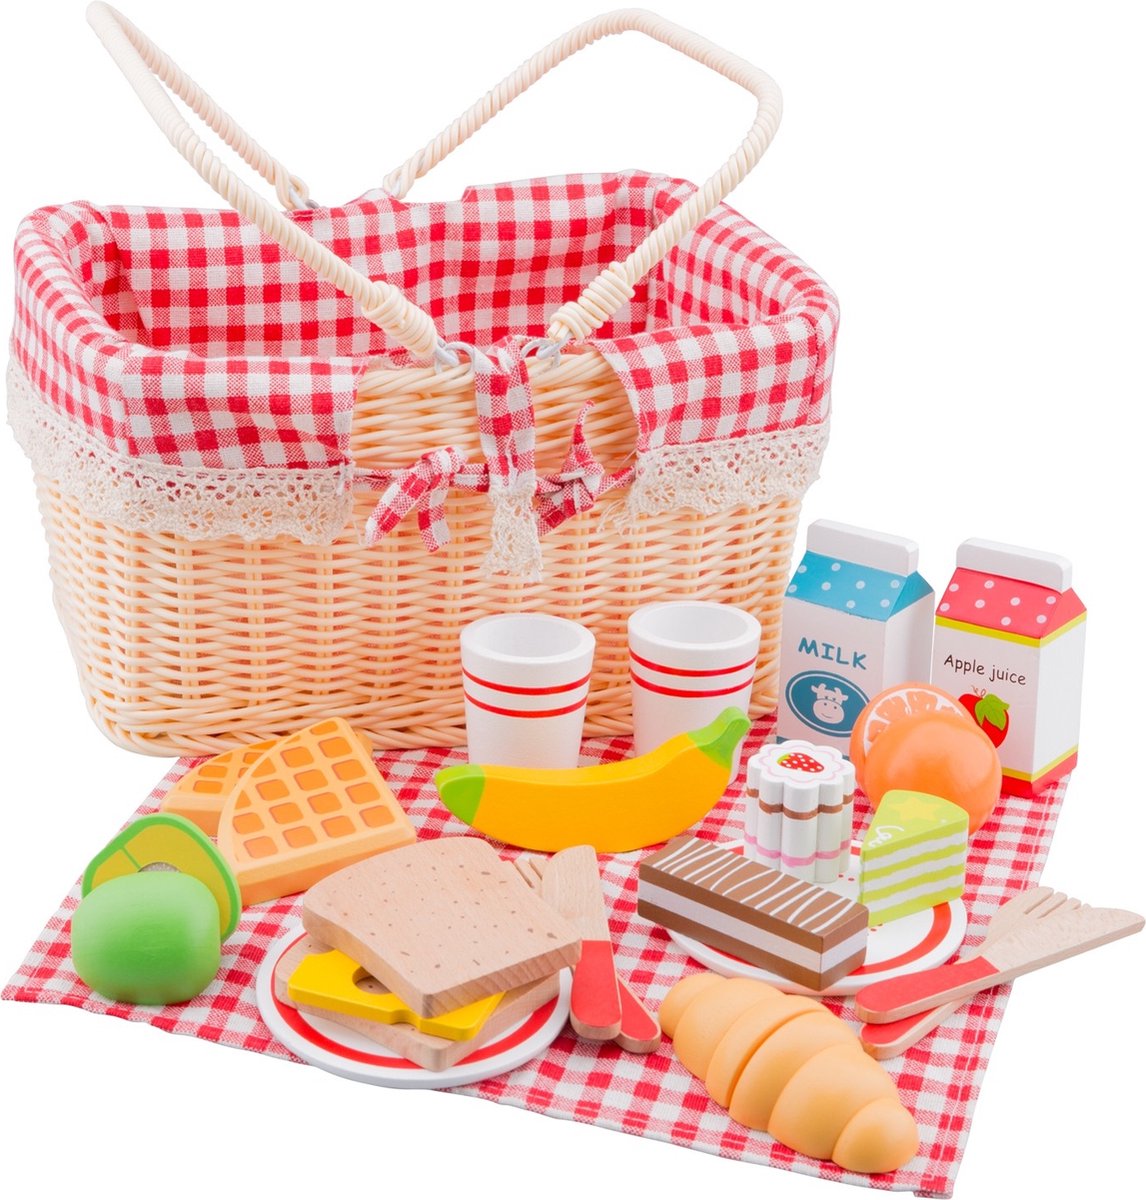 New Classic Toys Speelgoed Picknickmand Inclusief Accessoires | bol.com